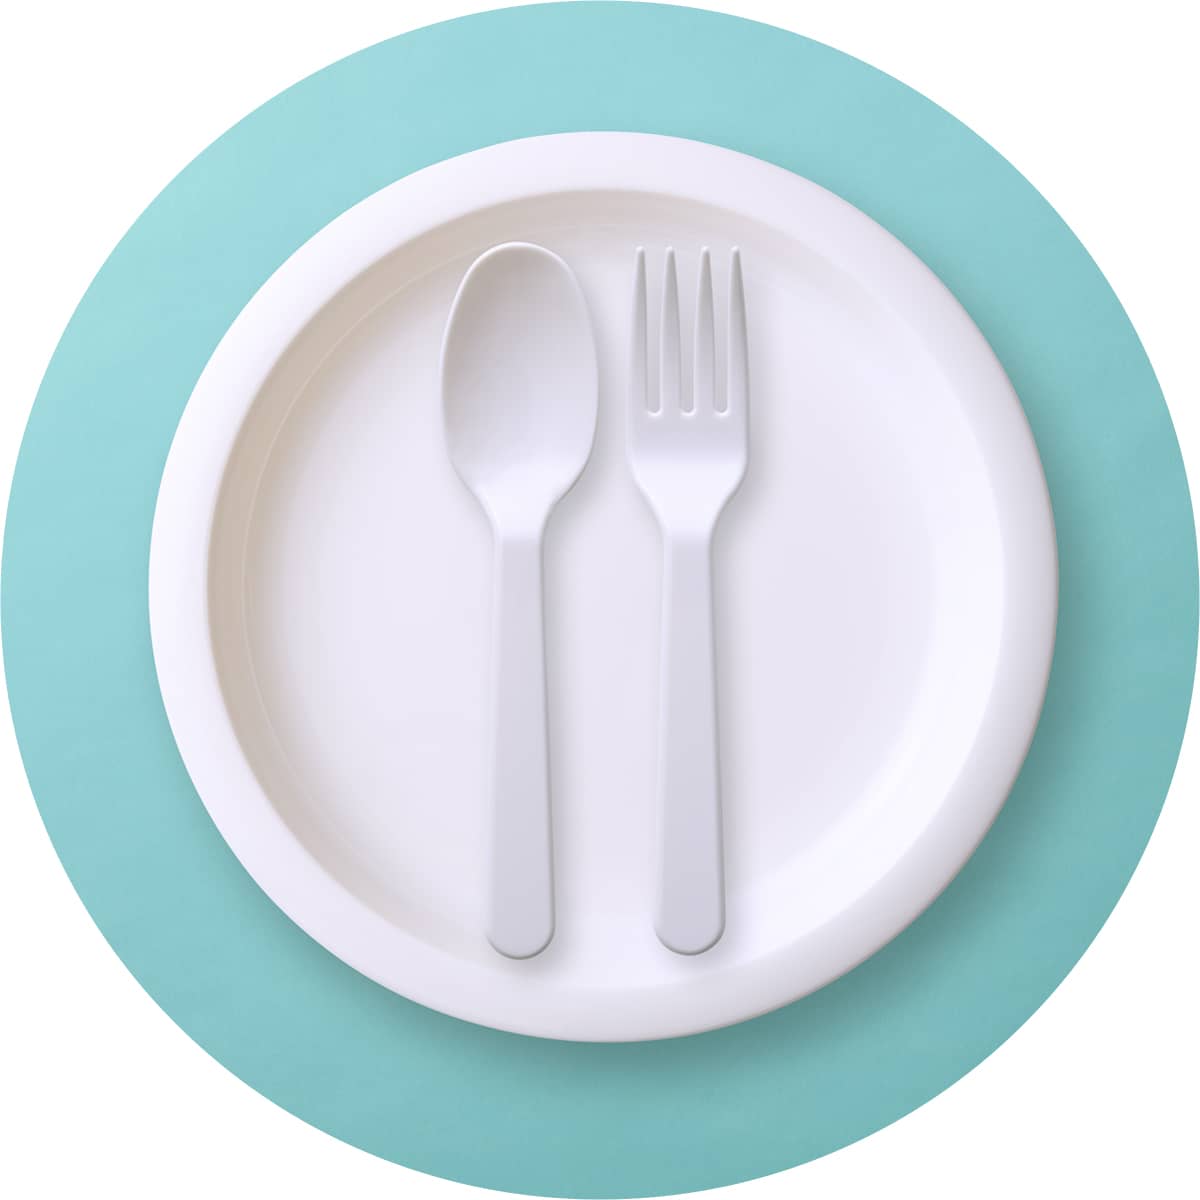 Shop for paper and plastic products, showing a paper plate and plastic cutlery 